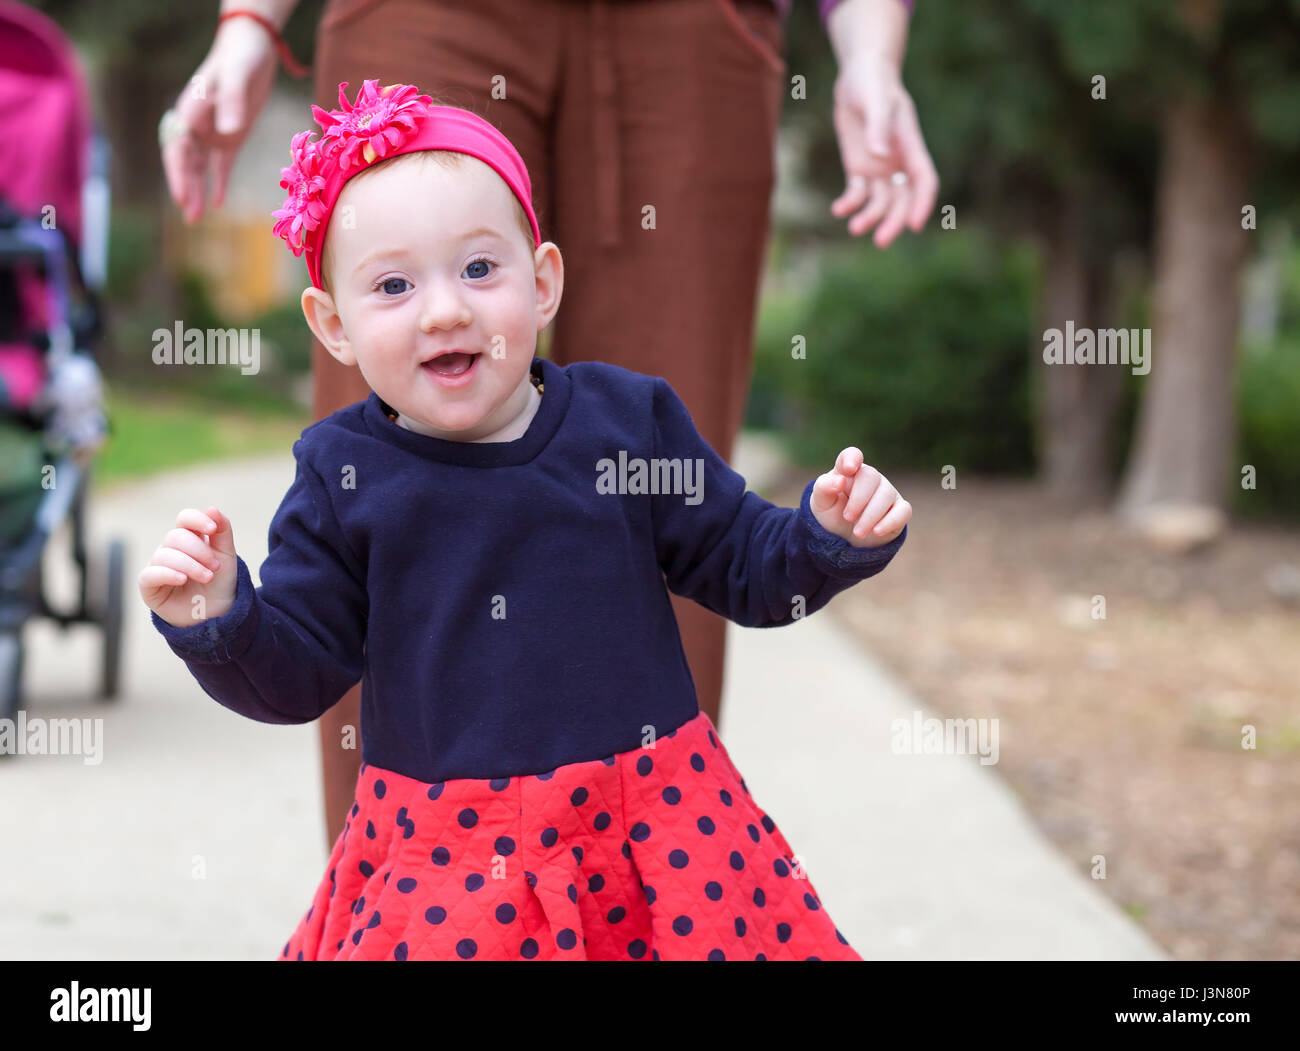 Adorable baby girl taking her first steps Stock Photo